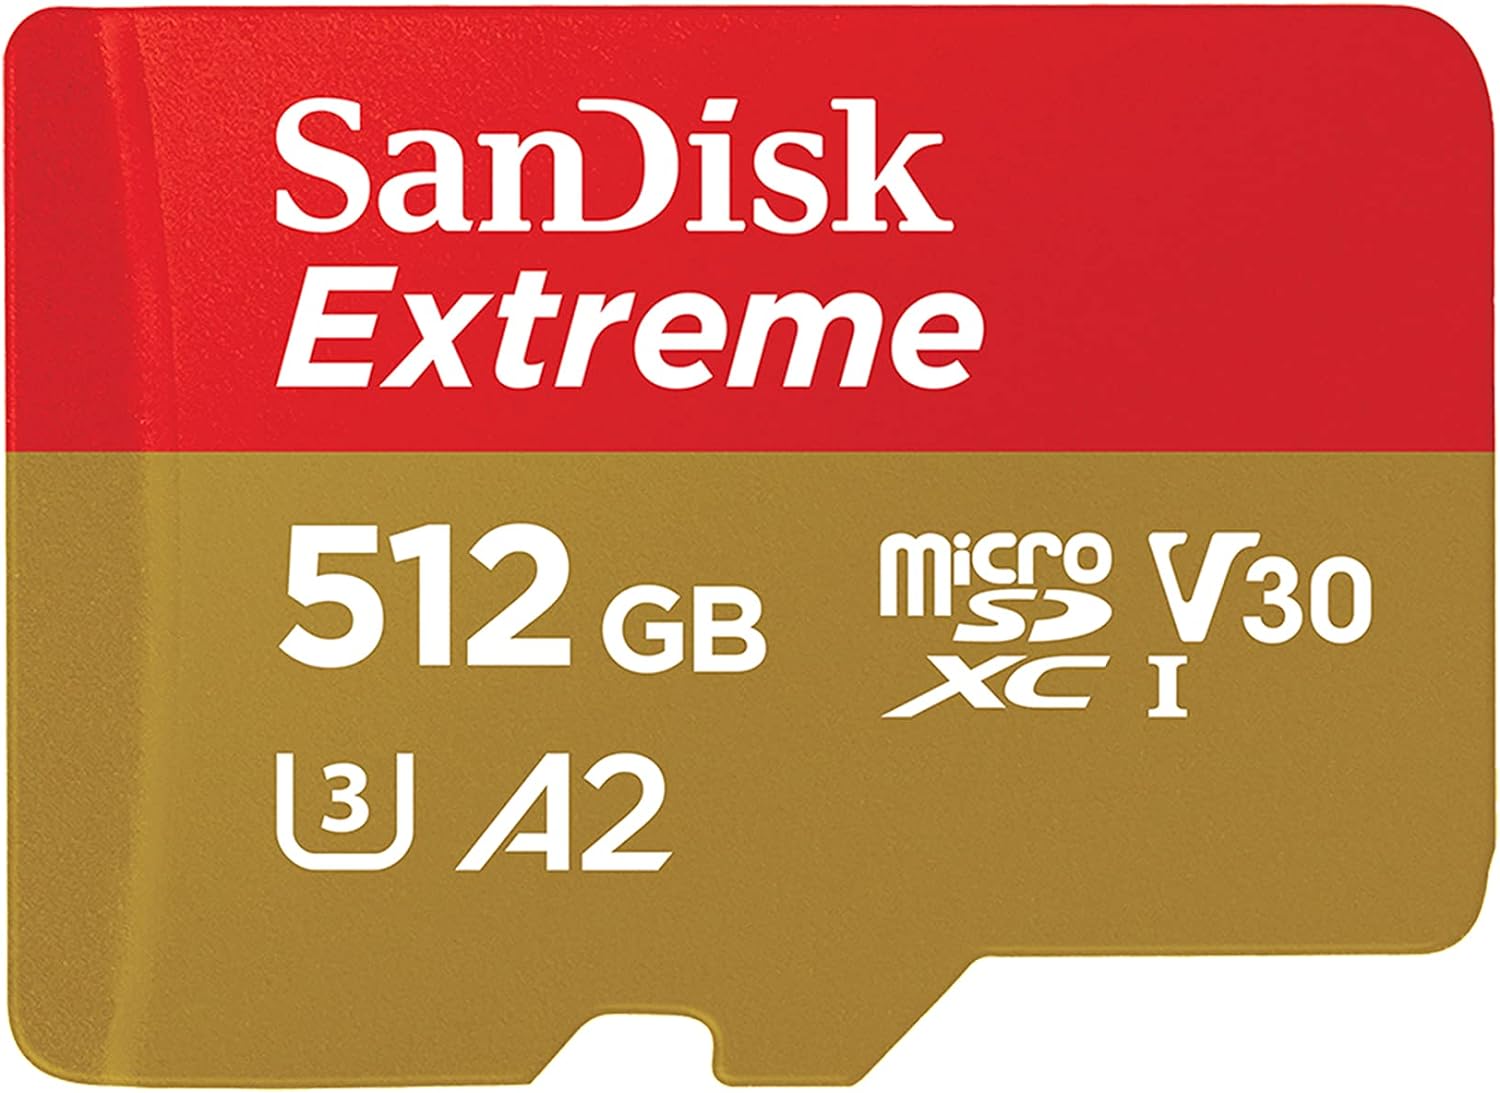 *BACK* 512GB SanDisk Extreme microSDXC UHS-I Memory Card w/ Adapter $30 + Free Shipping w/ Prime or on $35+